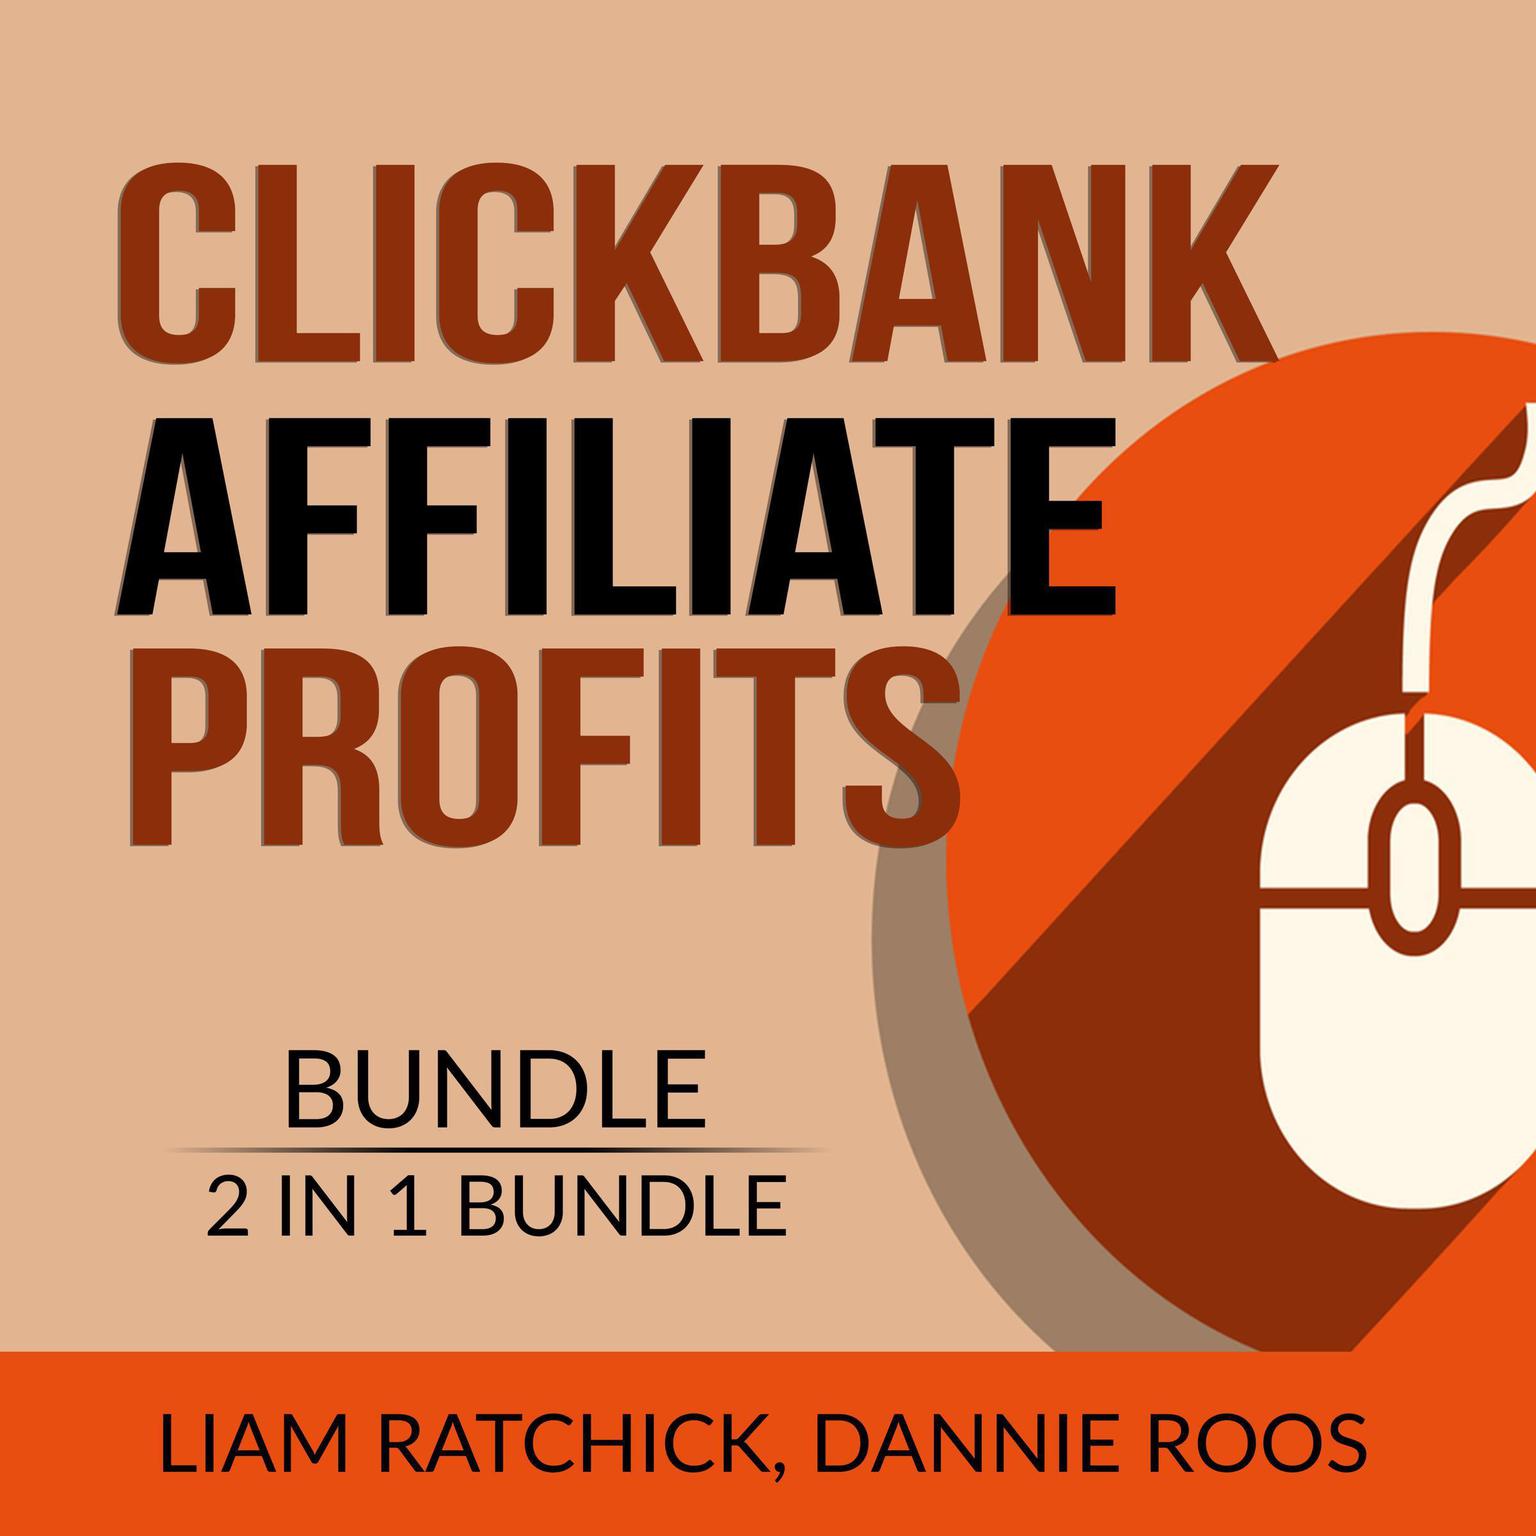 Clickbank Affiliate Profits Bundle, 2 IN 1 Bundle: The Click Technique and Clickbank Marketing Expert  Audiobook, by Dannie Roos